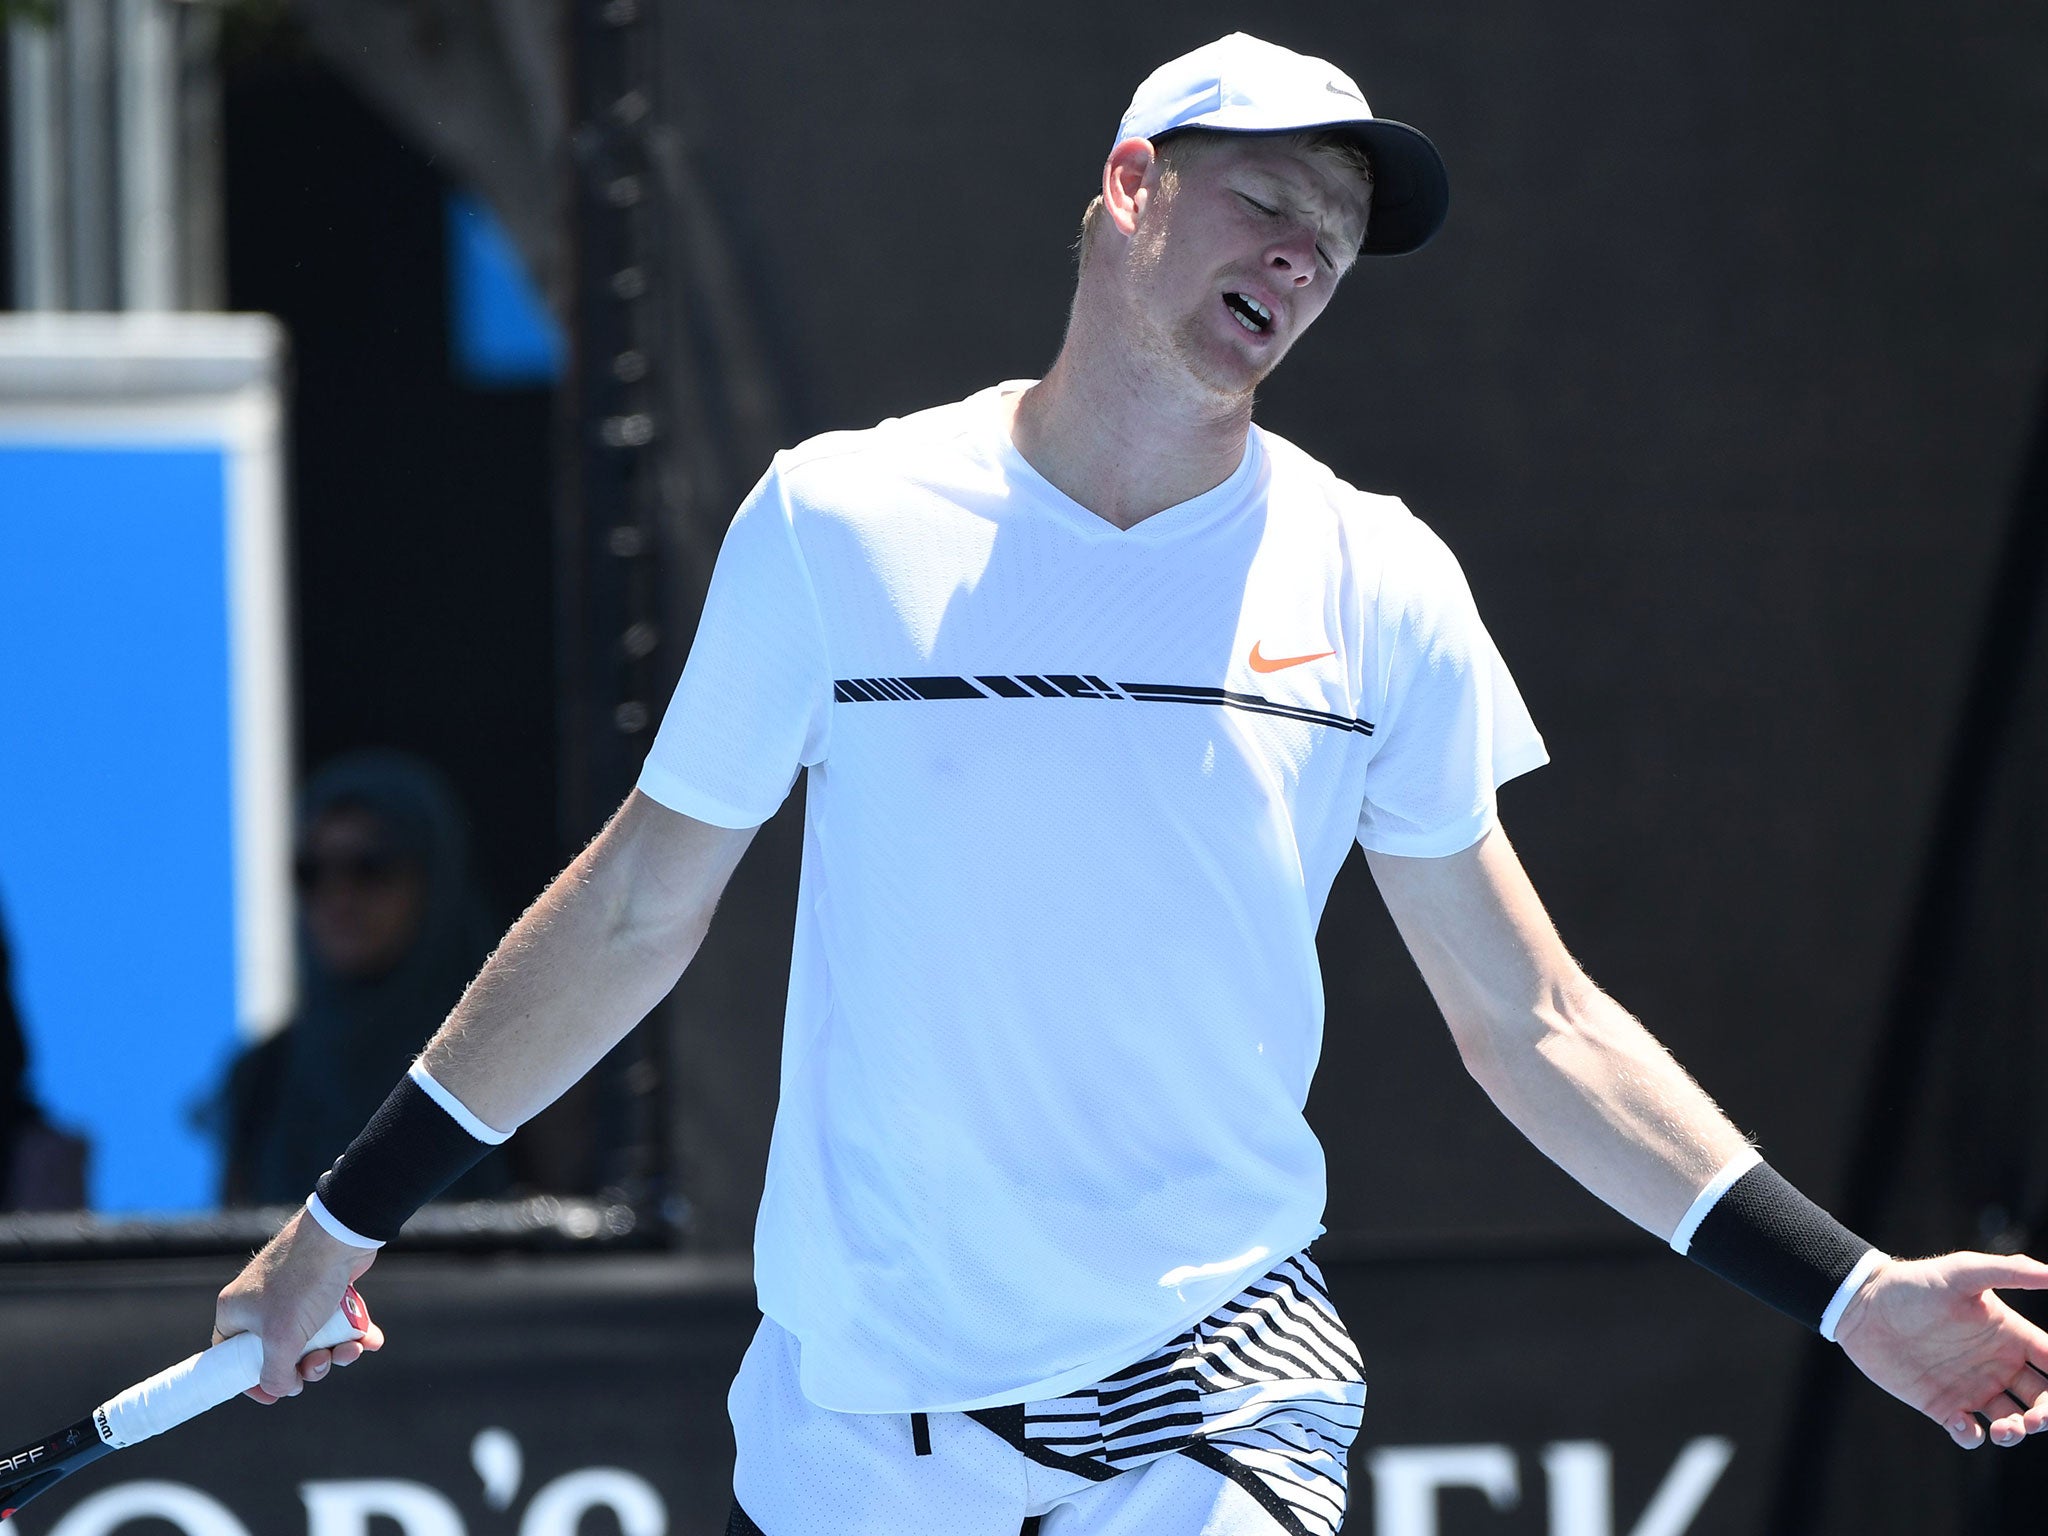 Kyle Edmund suffered a straight sets defeat by Pablo Carreno Busta in the Australian Open second round